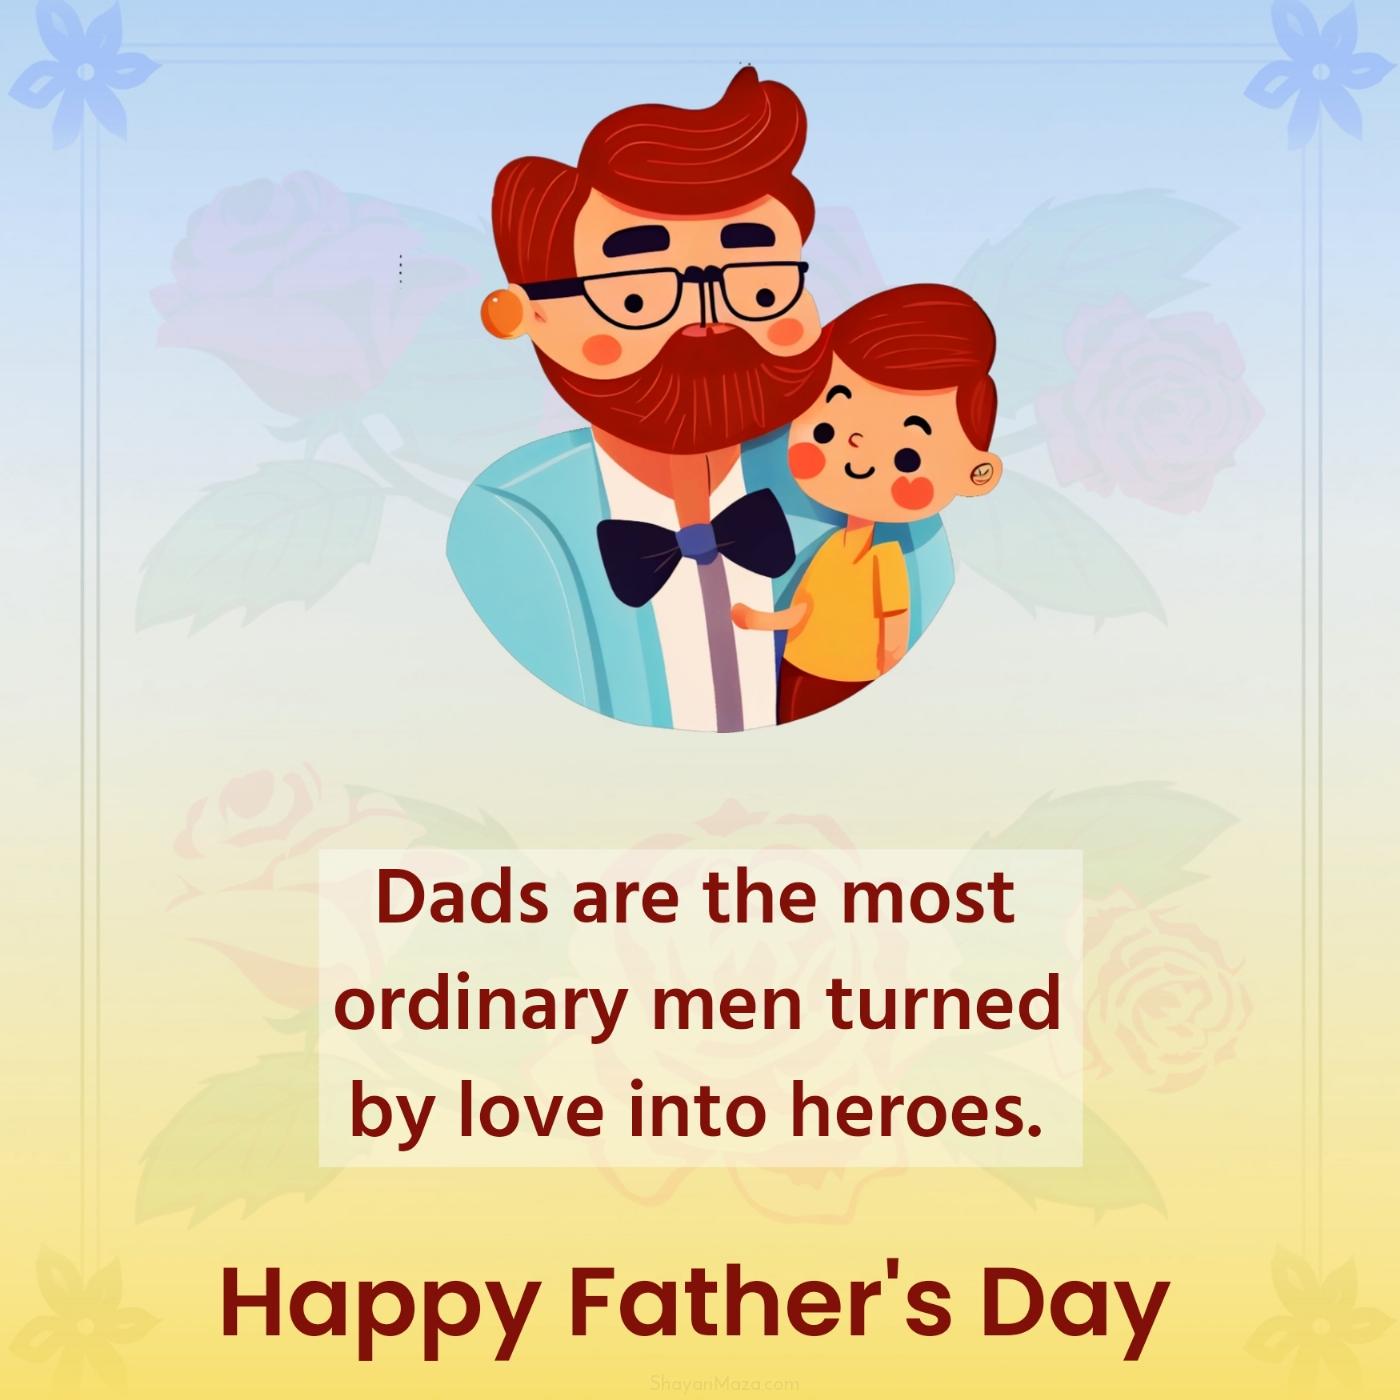 Dads are the most ordinary men turned by love